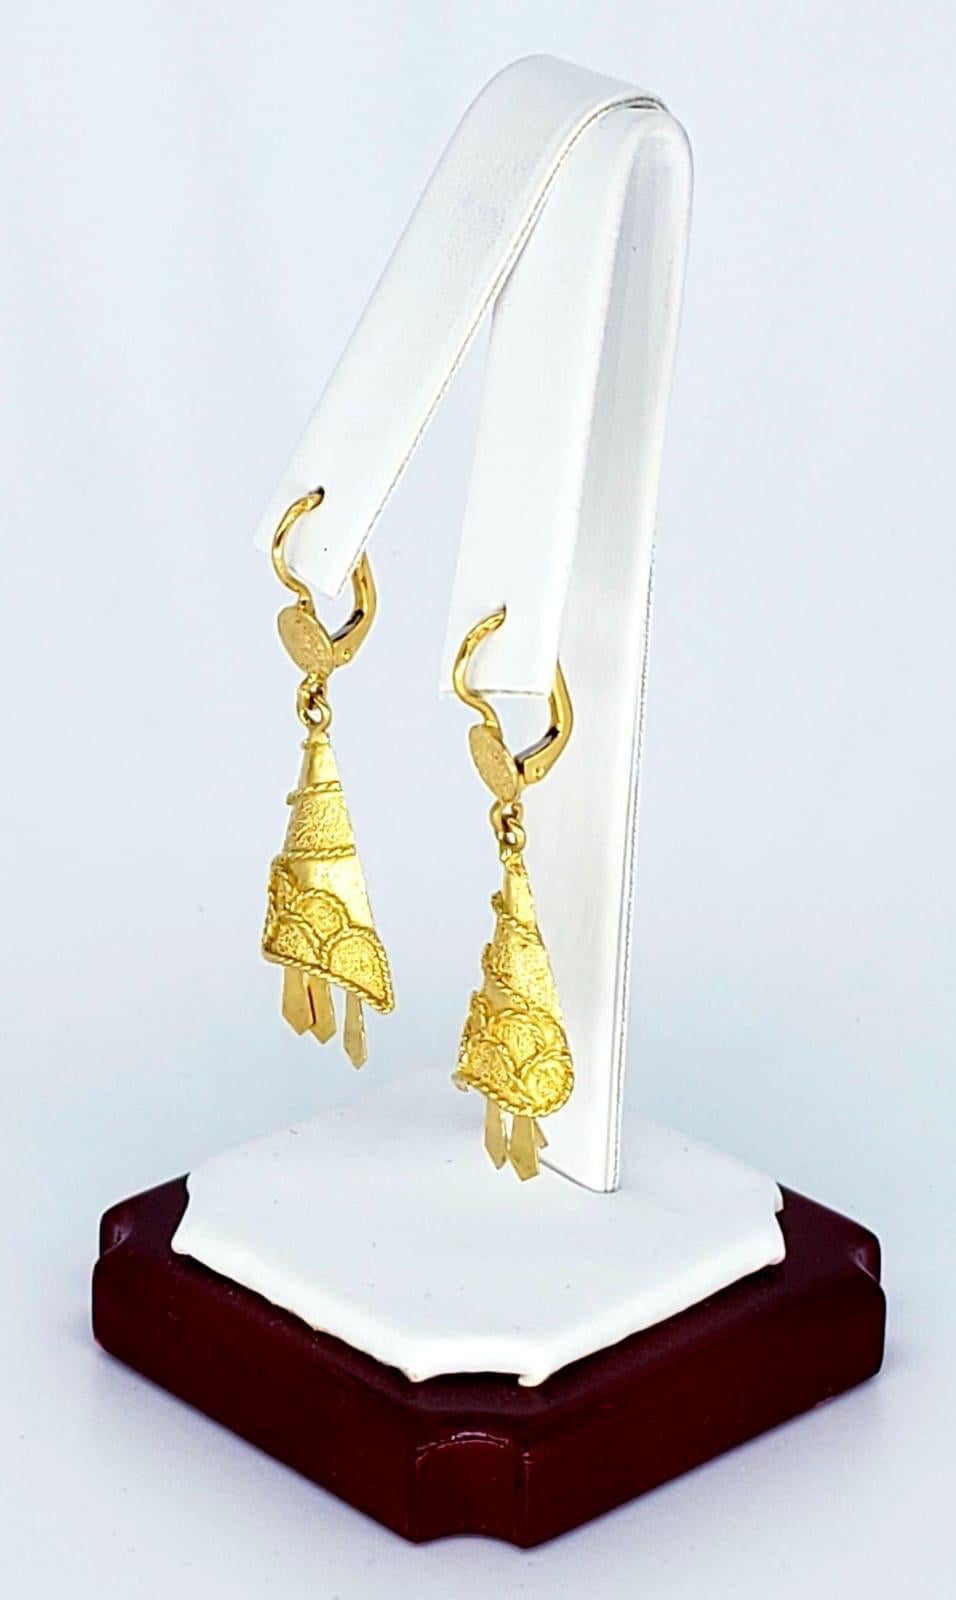 Antique Dangling Bell 18k Gold Earrings. The earrings are stamped 18k & Italy for country of manufacture. The earrings measure 12.6mm X 38.29mm and weight 6 grams 18k solid yellow gold. Circa 1910